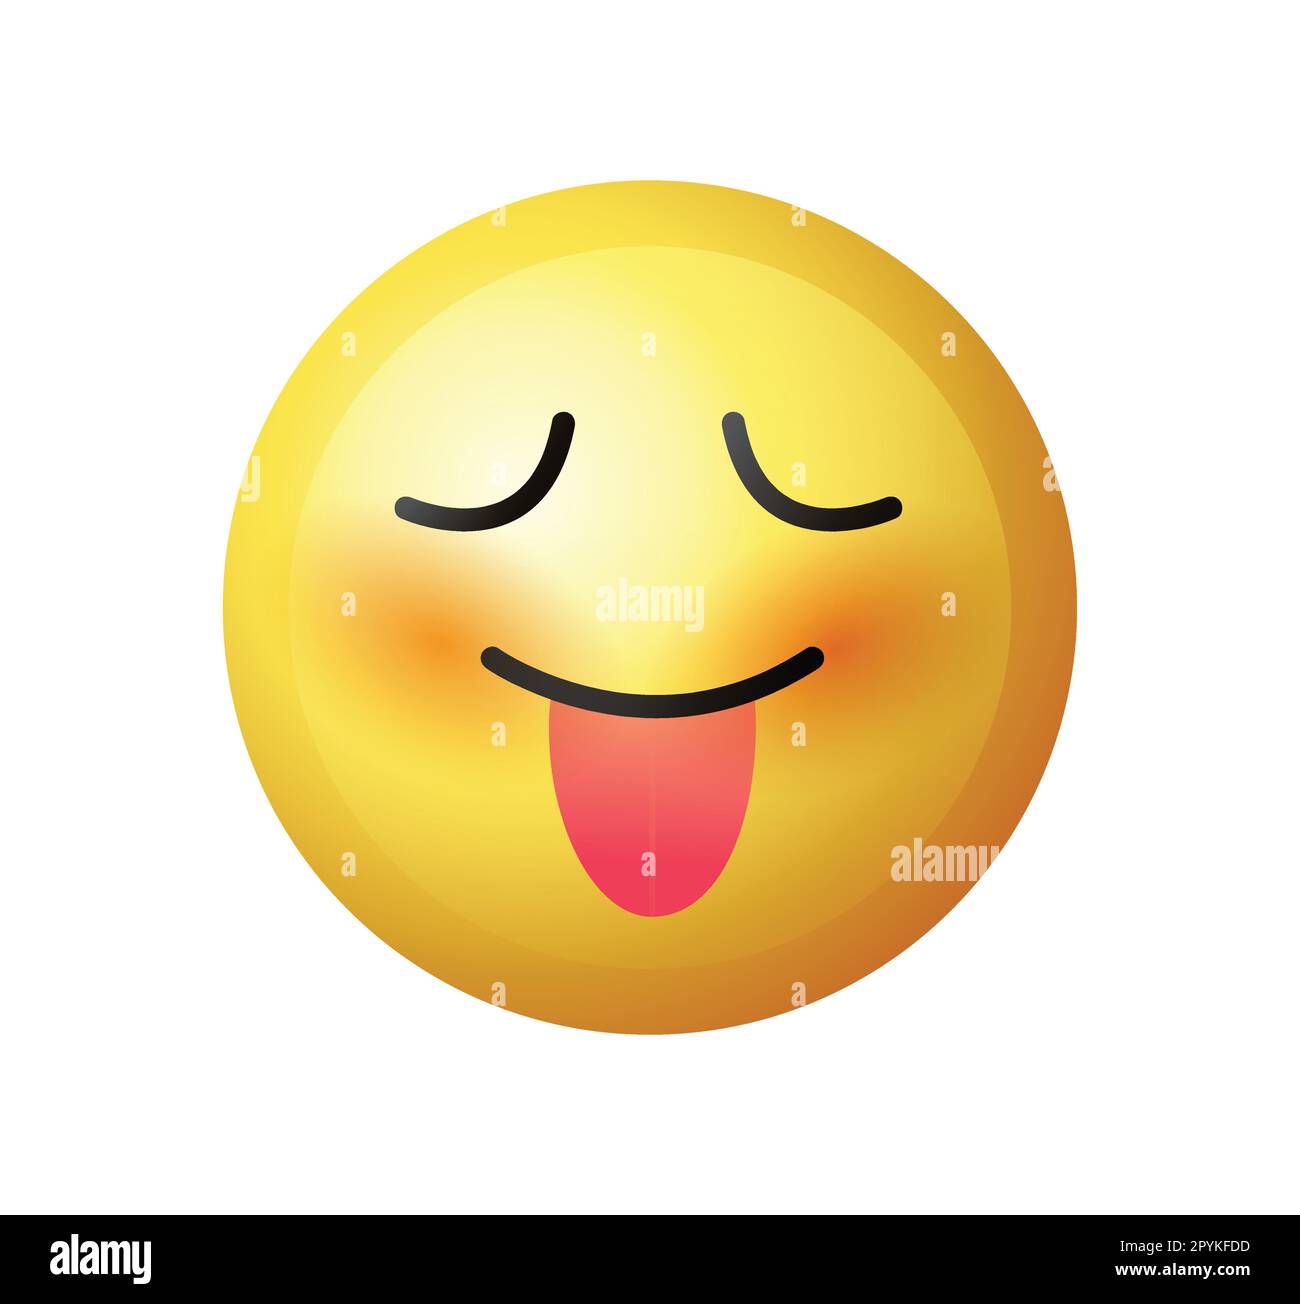 Teasing emoji with  closed eyes. Yellow face with closed eyes and playfully sticking out its tongue. Face With Stuck-Out Tongue. Tongue emoji. Stock Vector